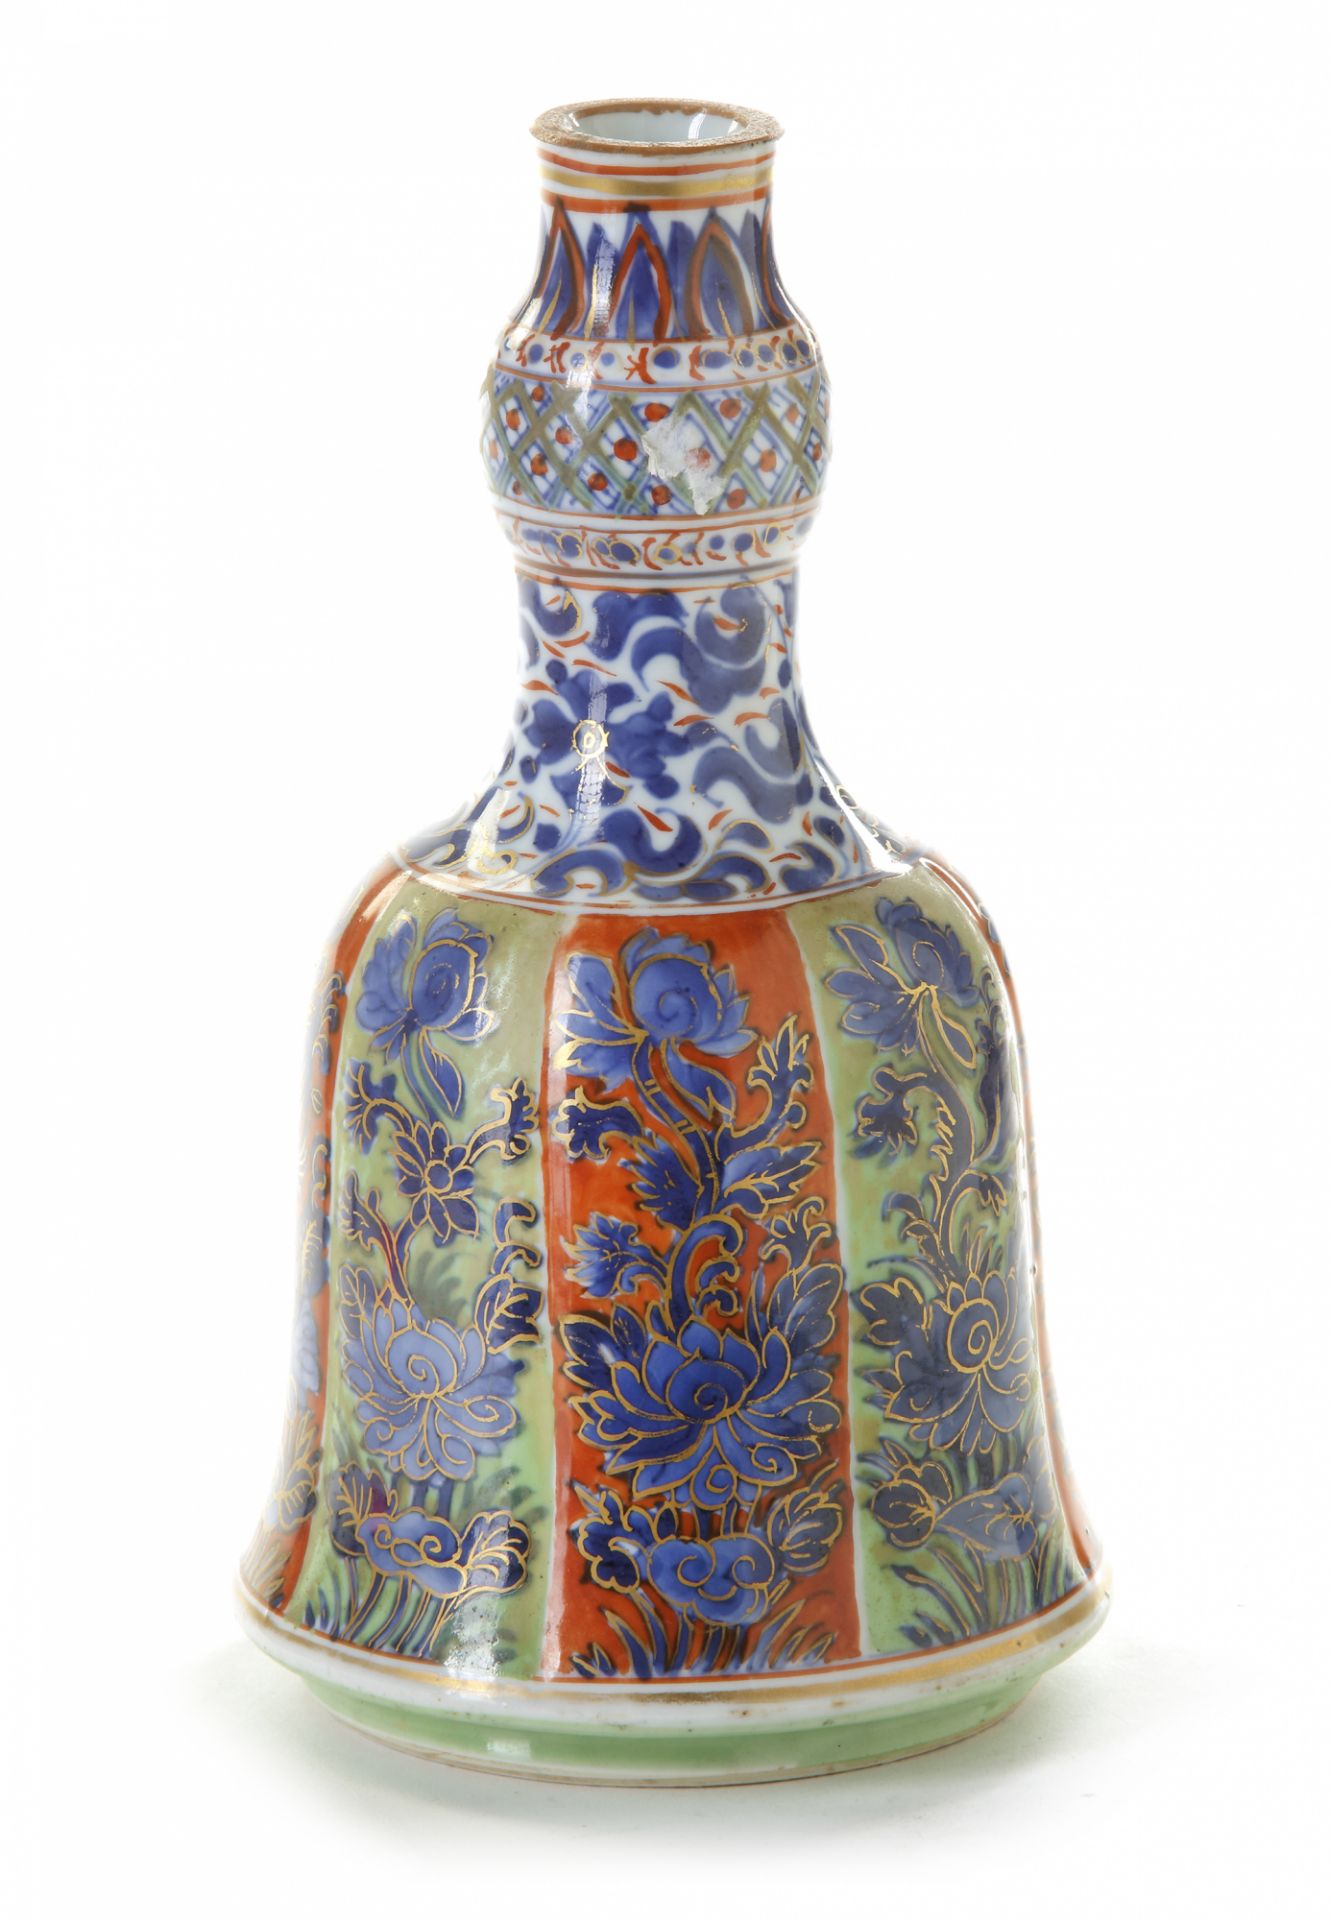 A LATER-ENAMELLED CHINESE BLUE AND WHITE HOOKAH BASE, CHINA, KANGXI PERIOD (1662-1722) - Image 2 of 4